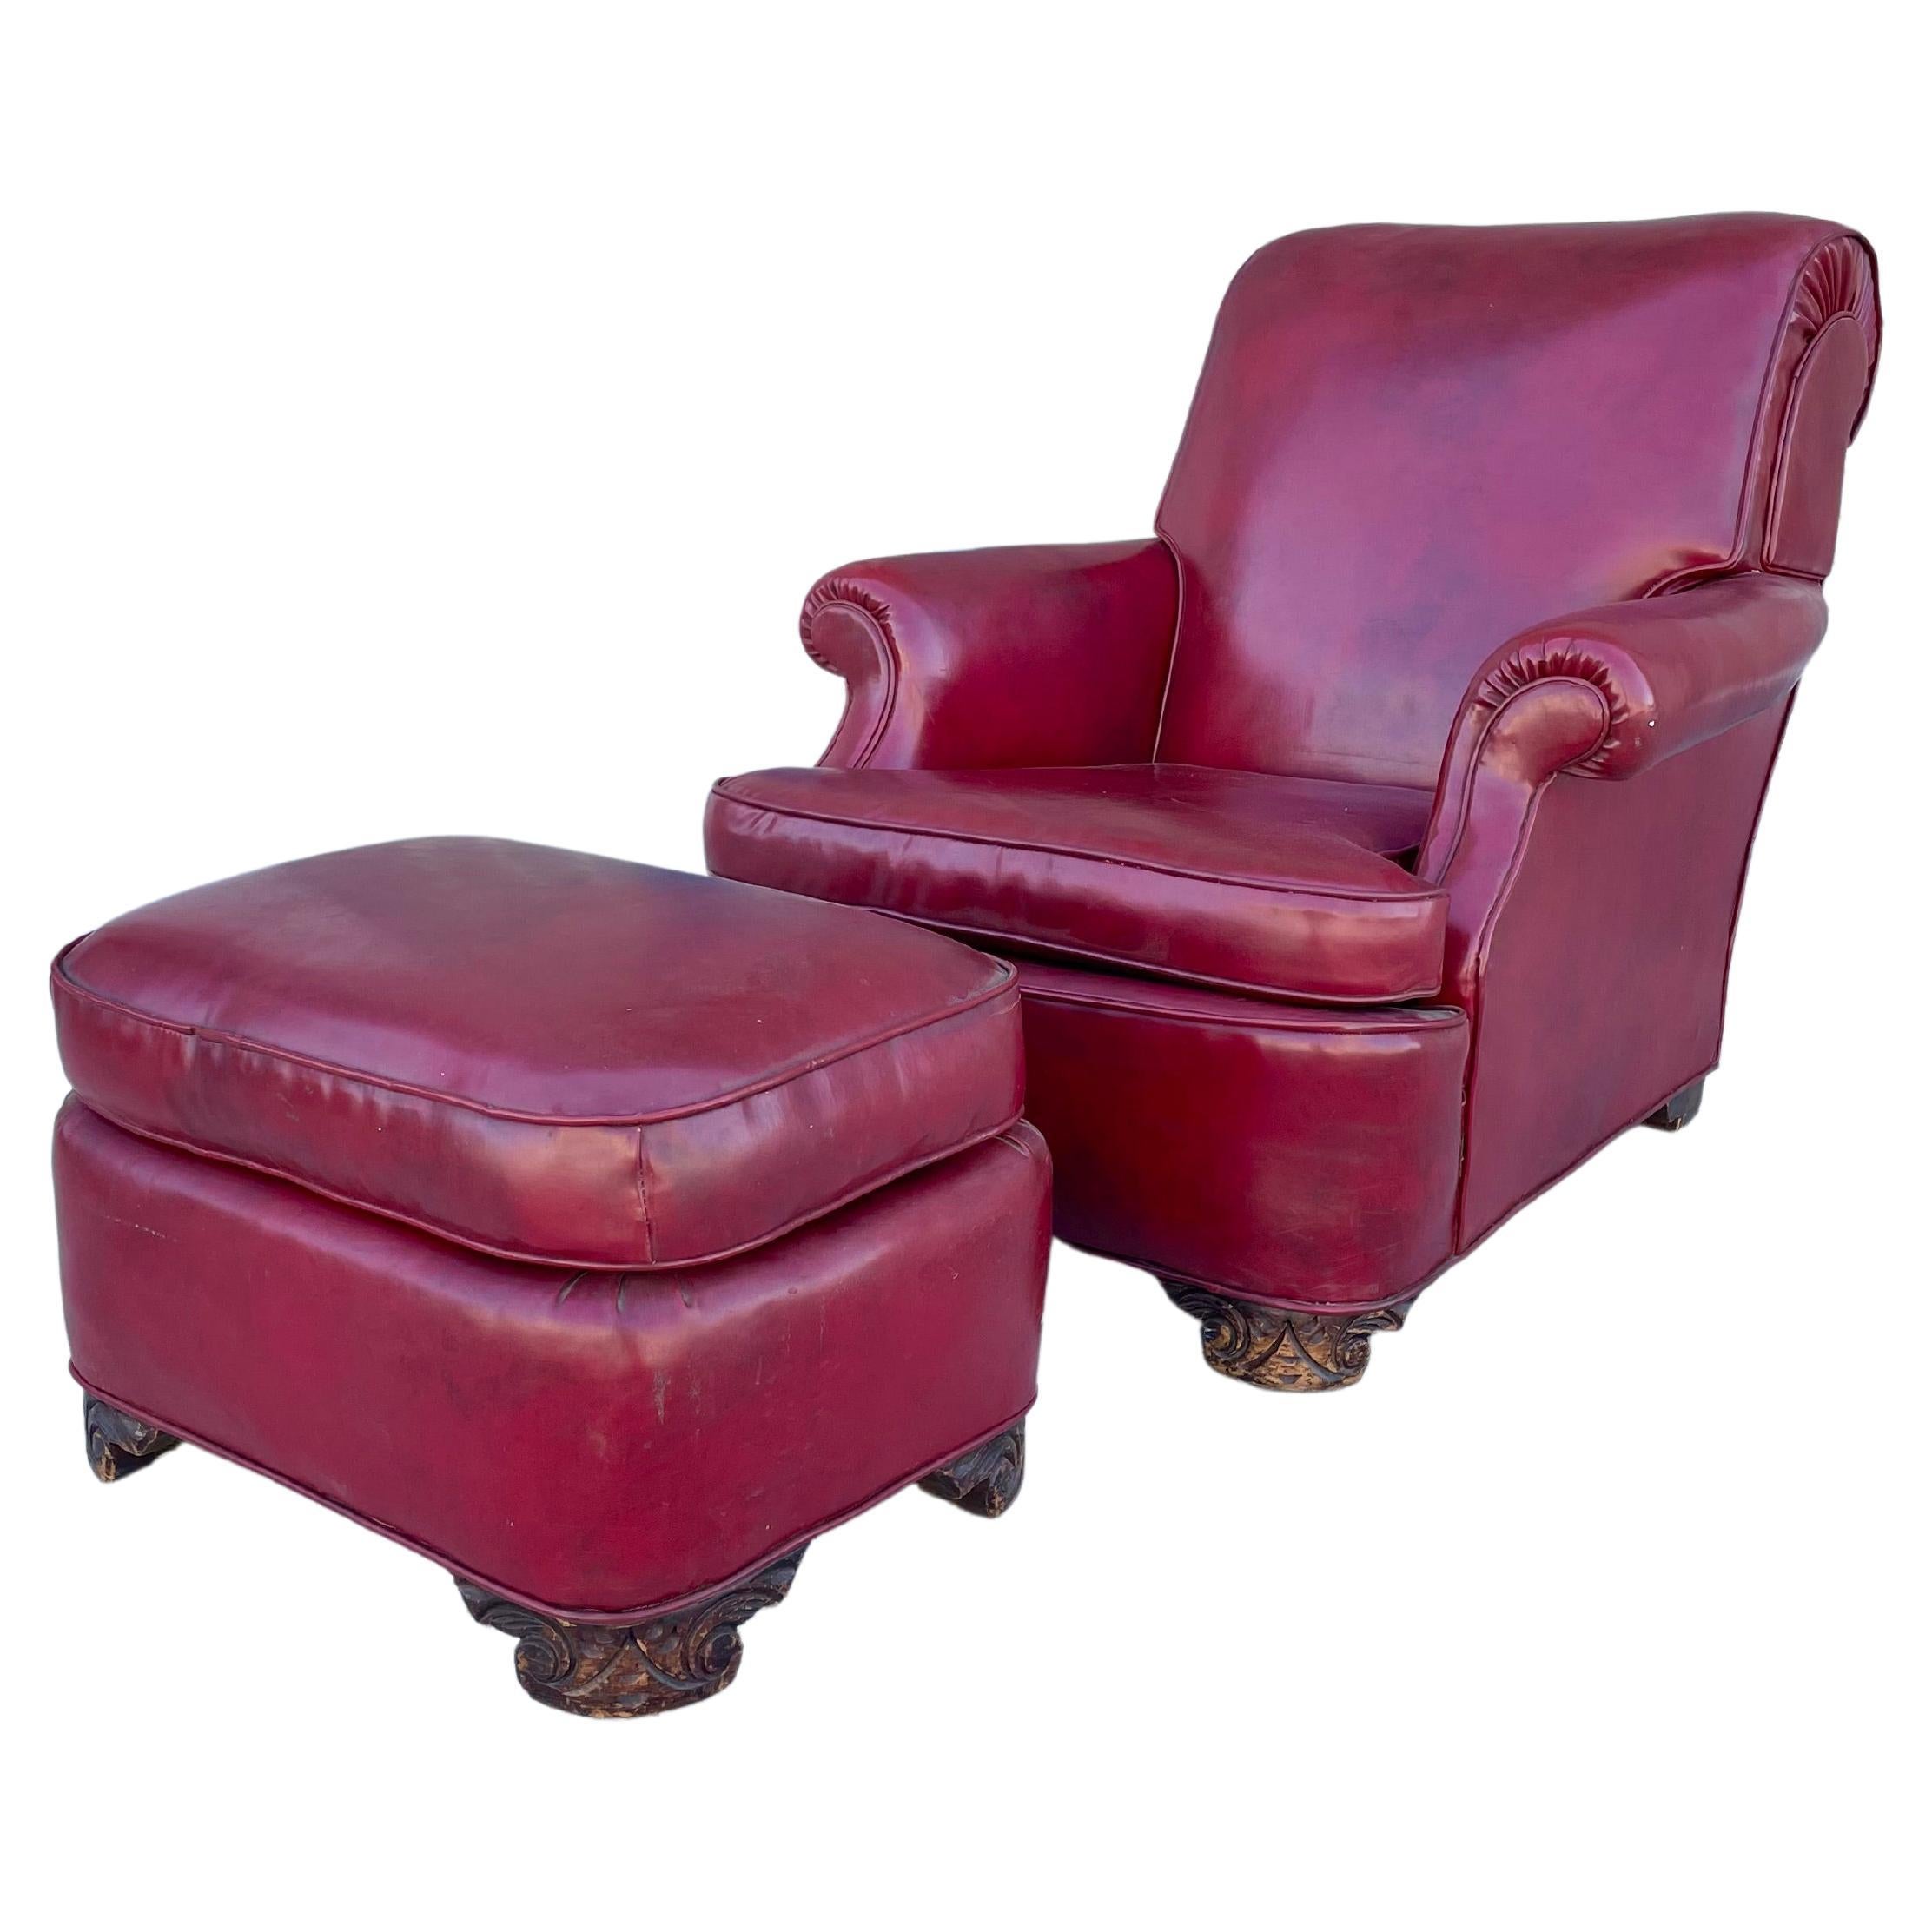 1950s Vintage Leather Chair & Ottoman - Set of 2 For Sale